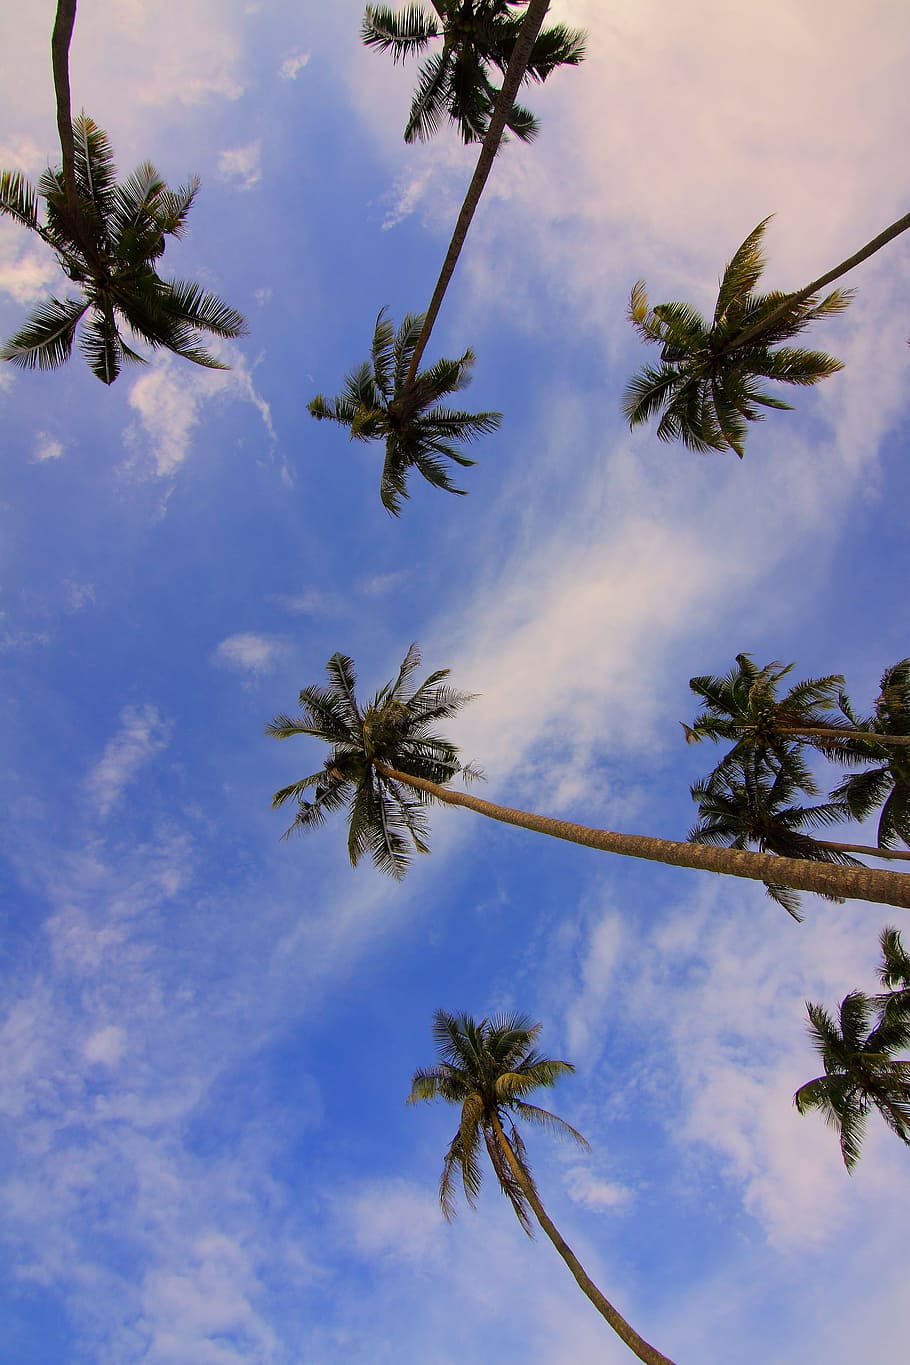 coconut, tree, nature, plant, green, leaves, blue, sky, clouds, tropical climate